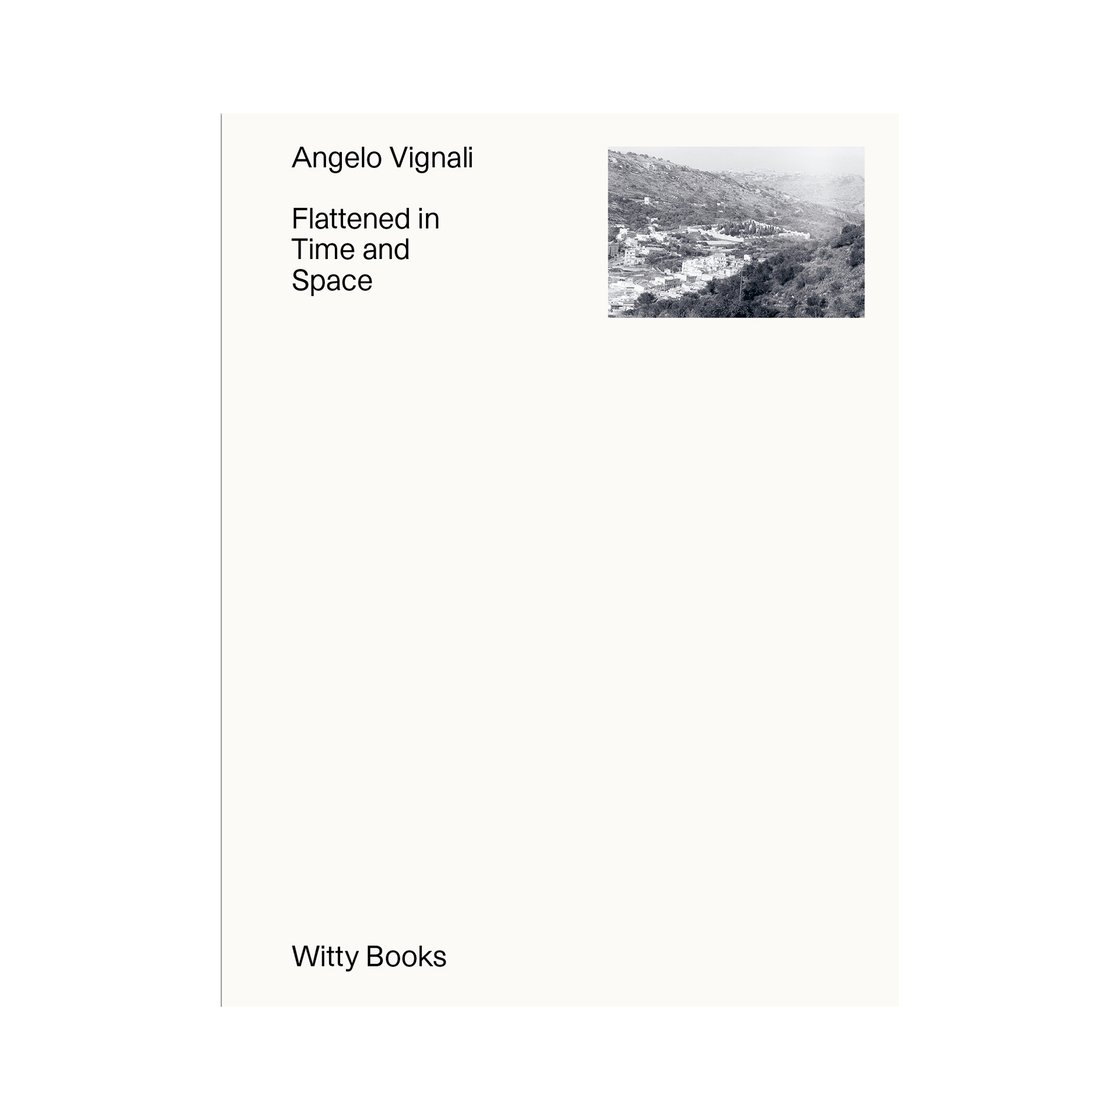 Image of Flattened in Tme and Space - Angelo Vignali